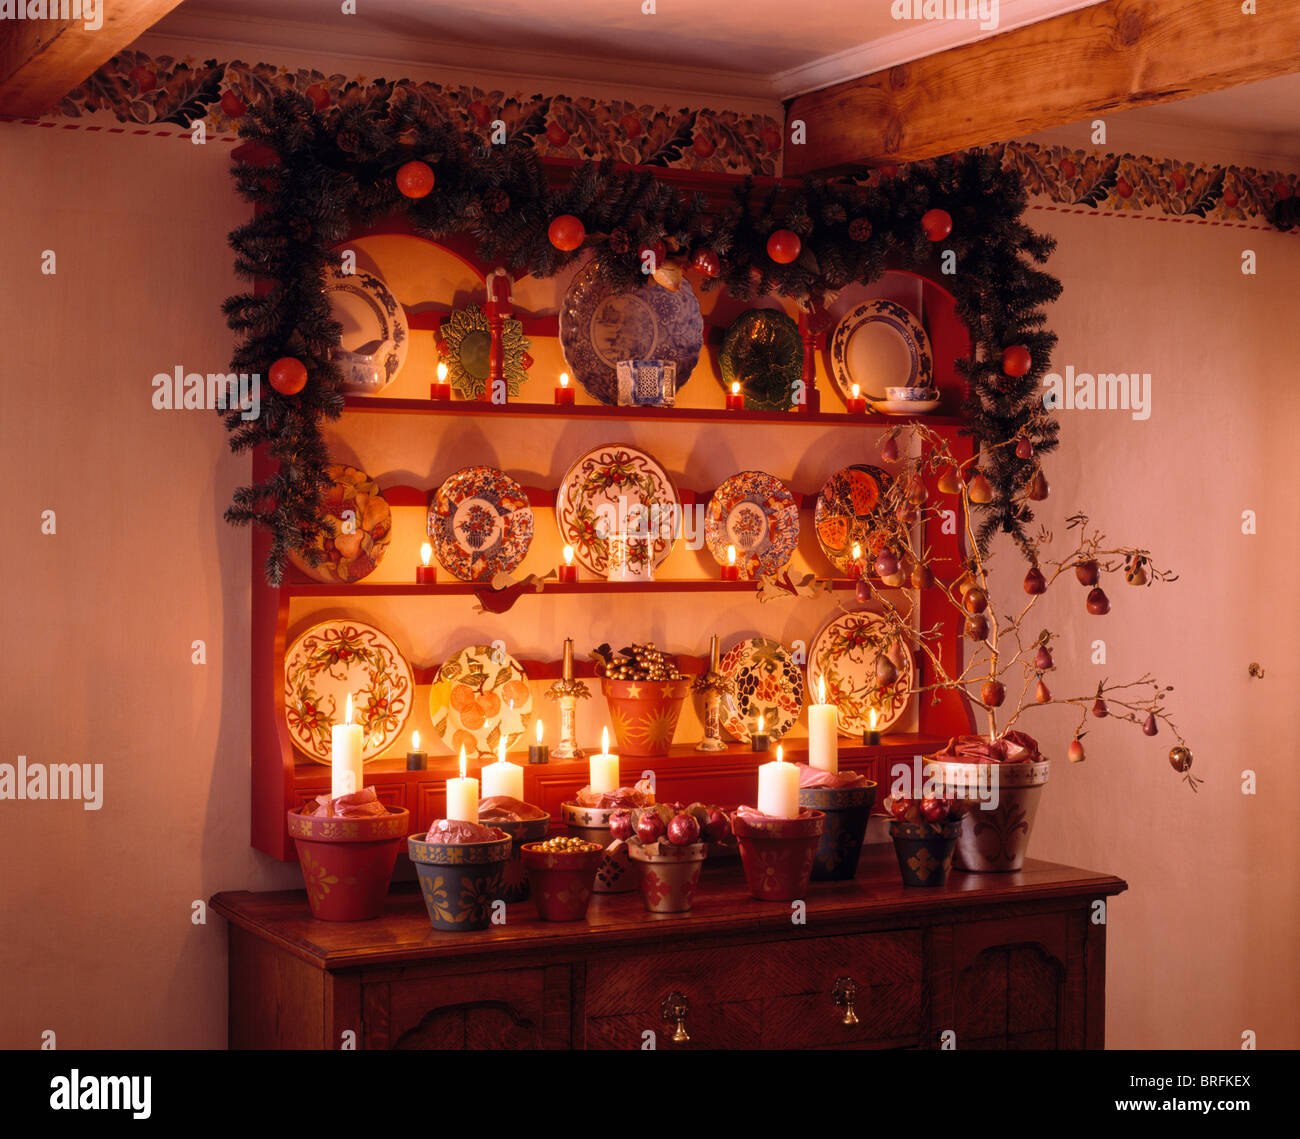 Christmas garland on shelves above sideboard with lighted candles and pottery plates Stock Photo